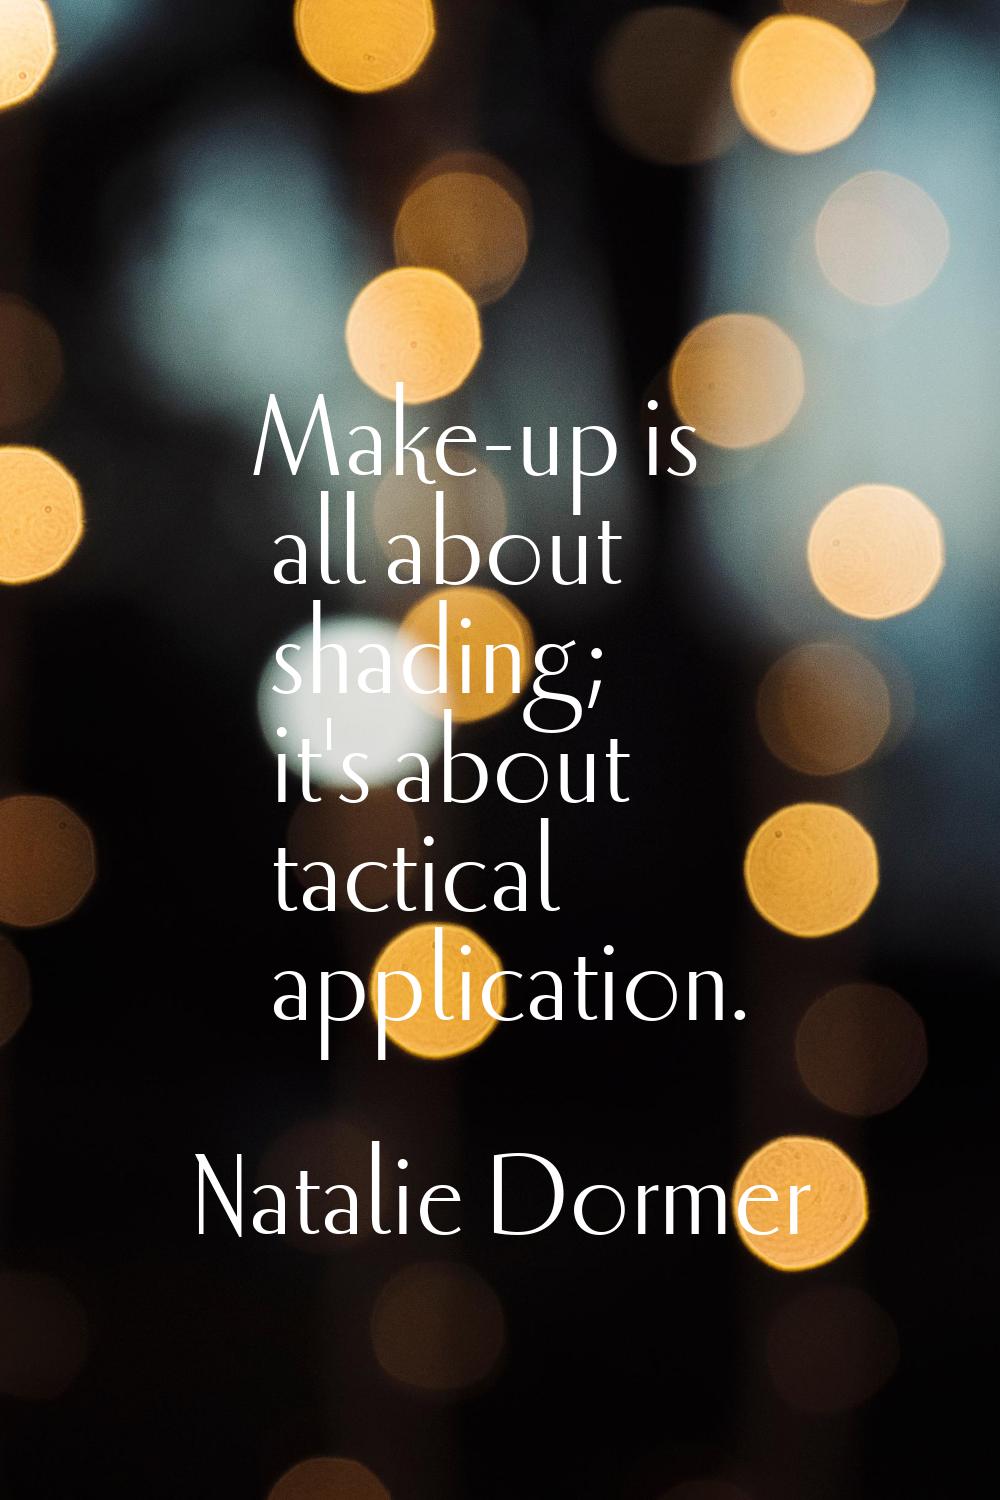 Make-up is all about shading; it's about tactical application.